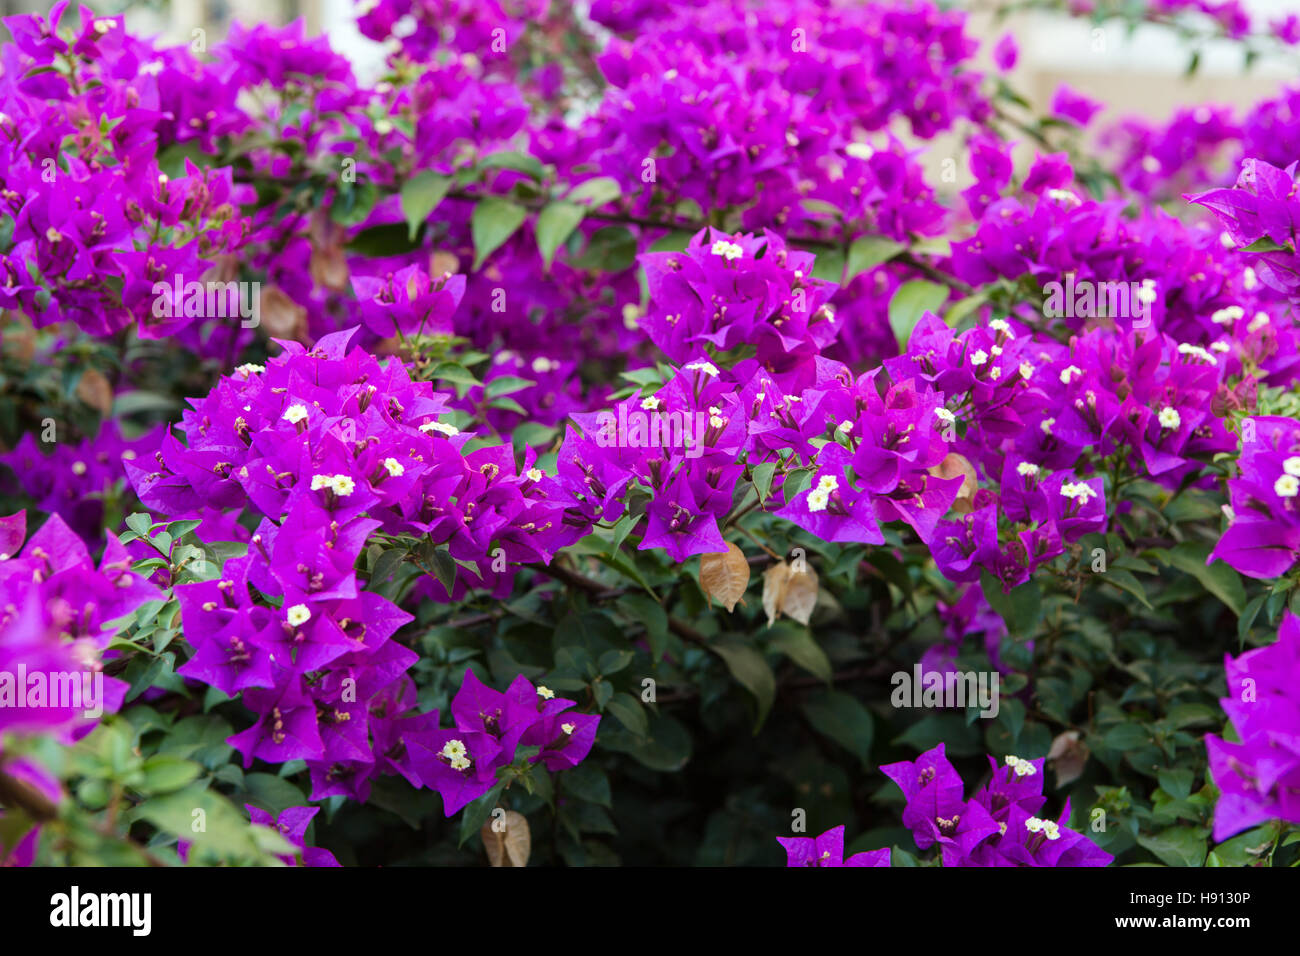 Close-up of Bougainvillea flowers in a garden Stock Photo